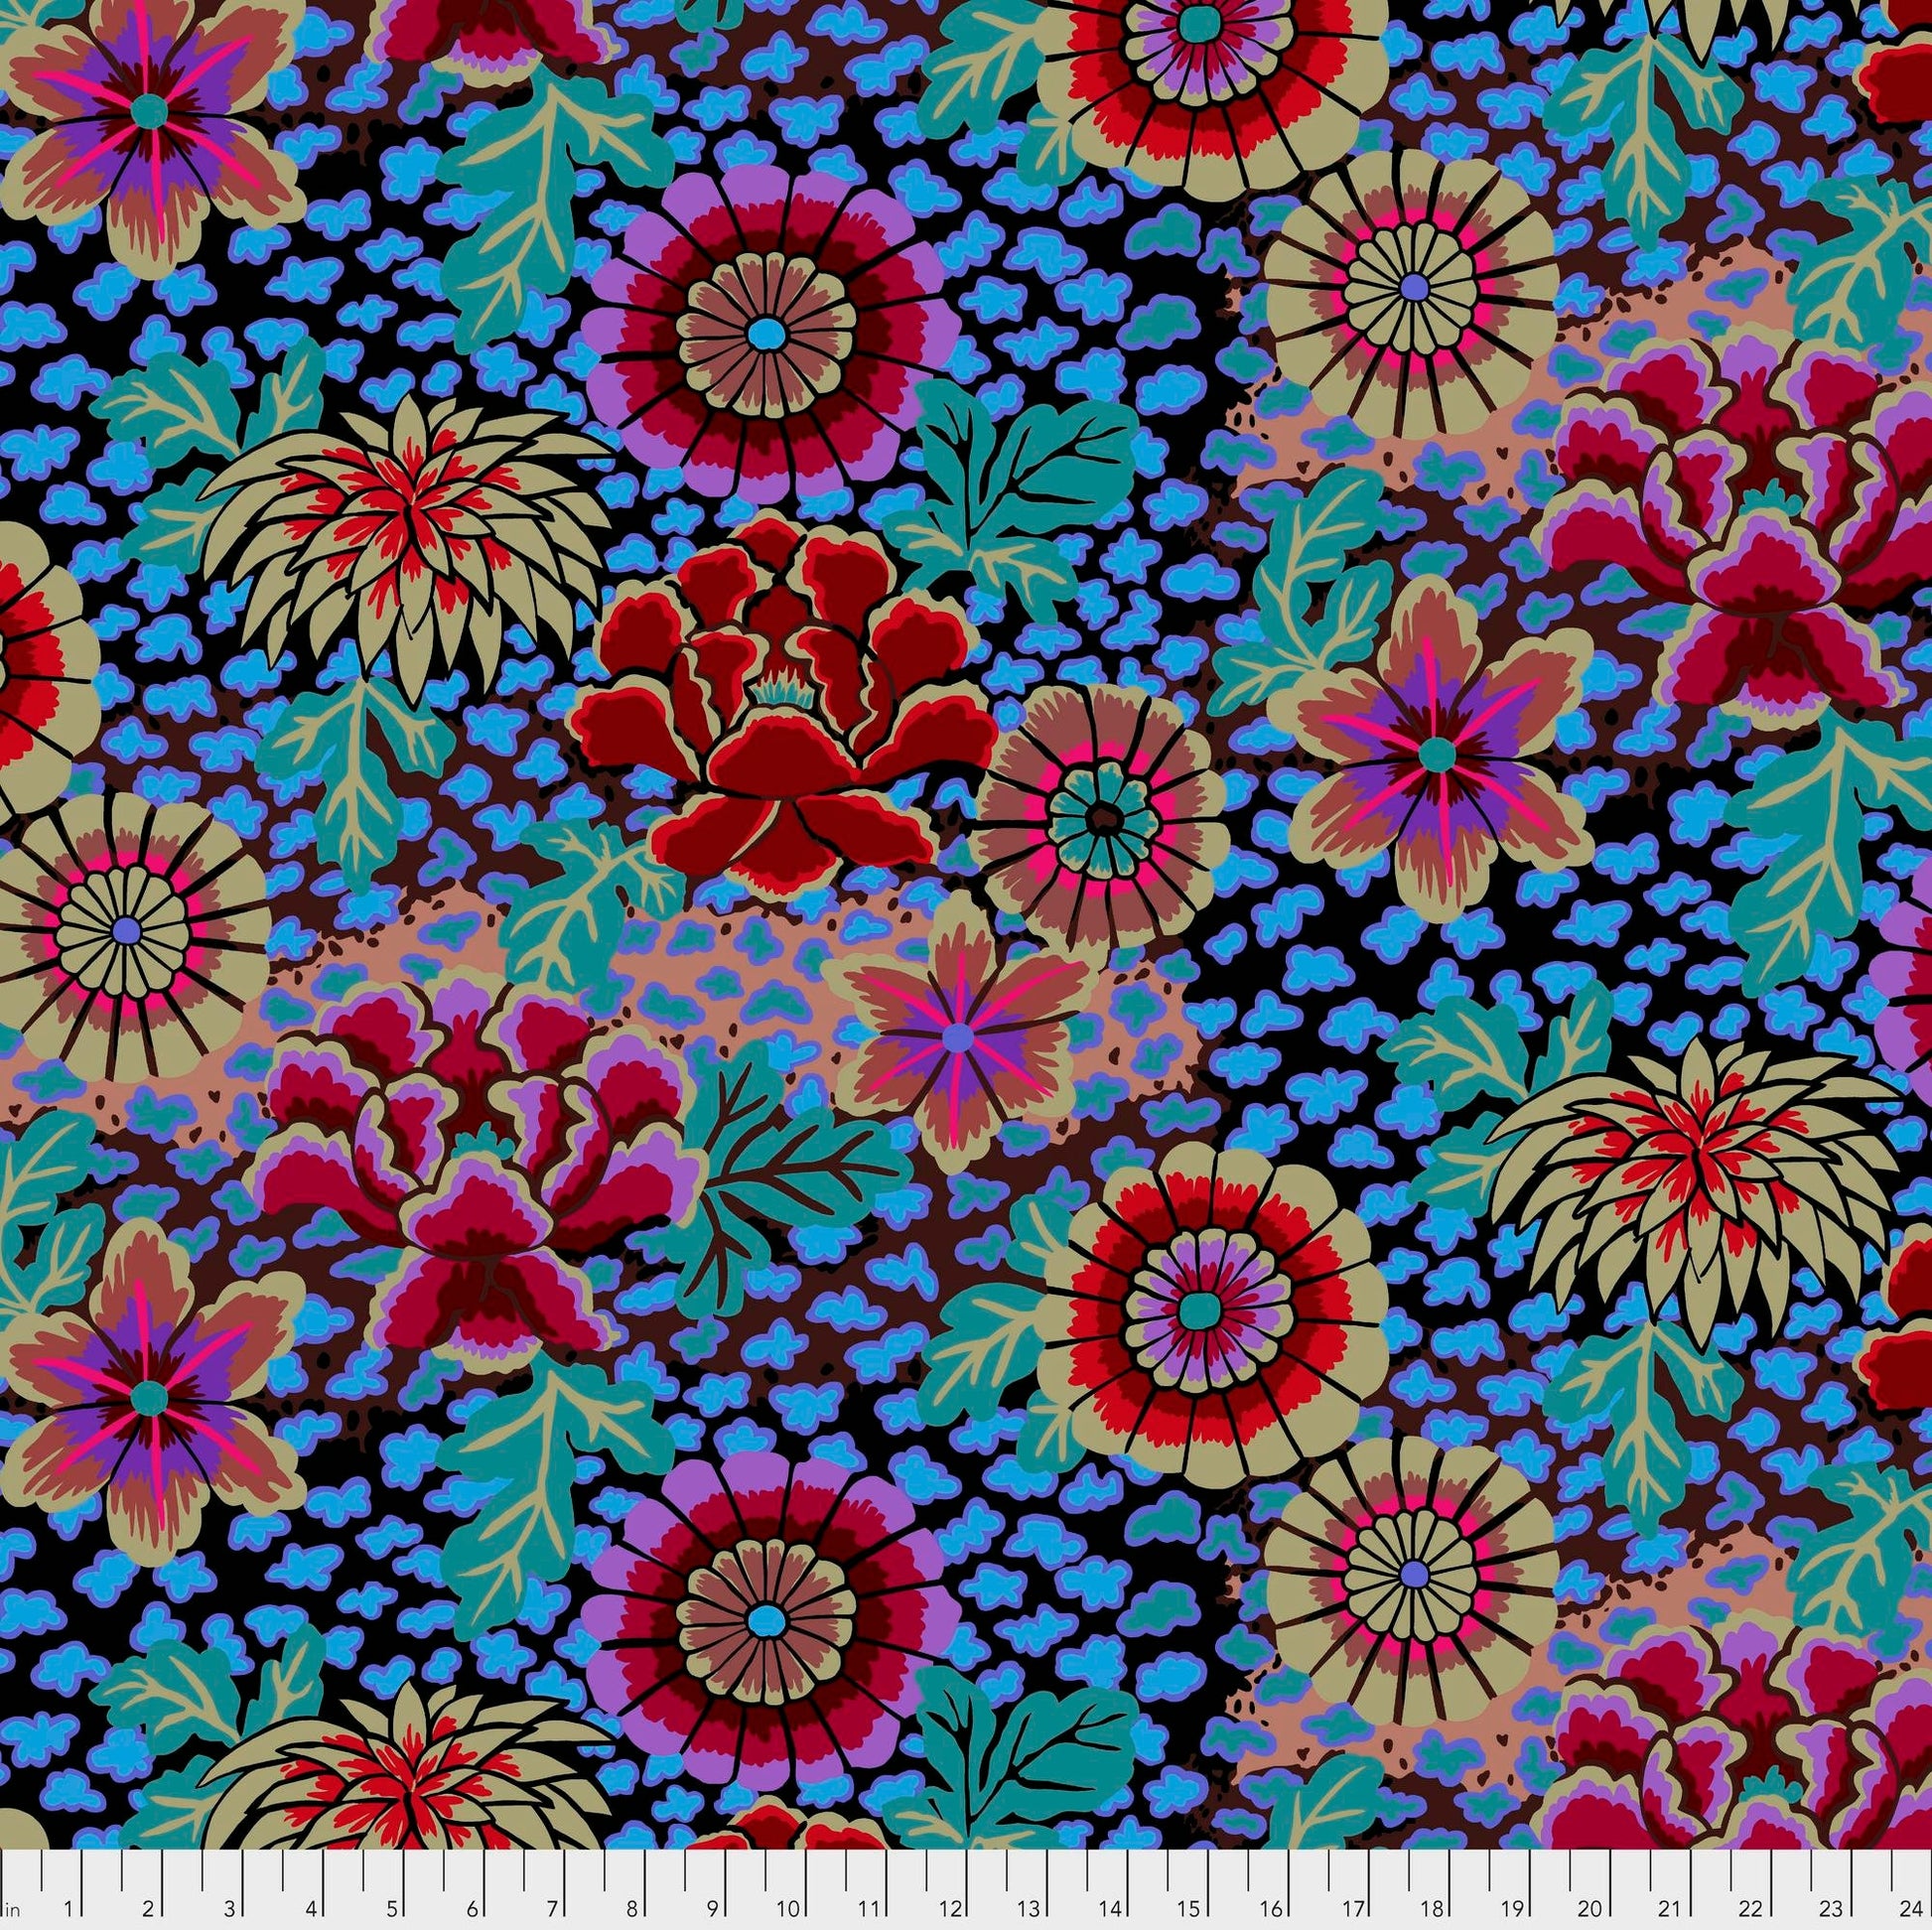 Dream Dark Kaffe Fassett Collective Classics Collection FreeSpirit Fabric PWGP148 100% Quilters Cotton OOP Fabric Fetish